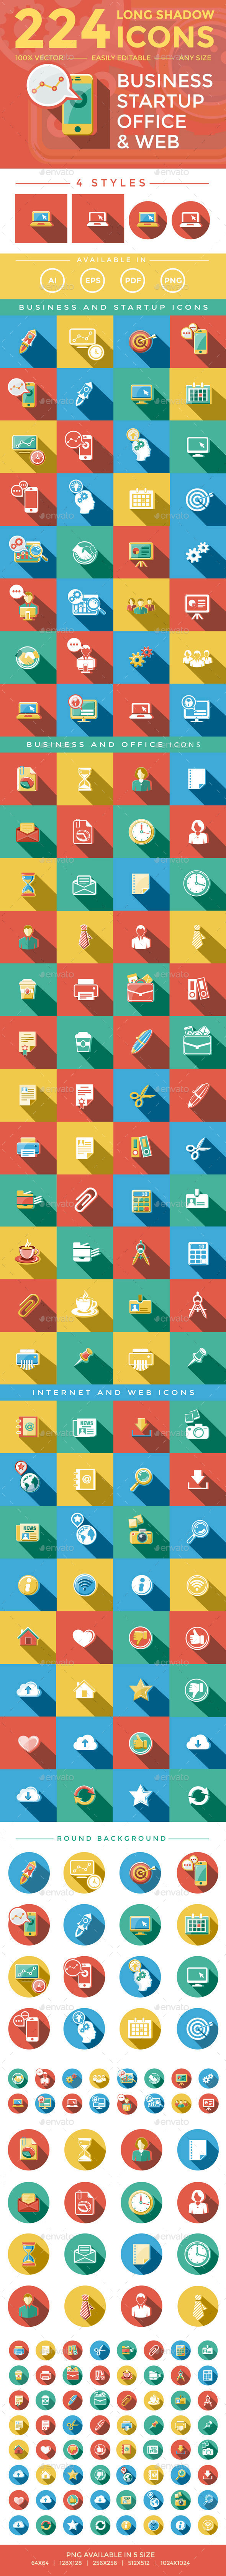 Business & Startup Icons